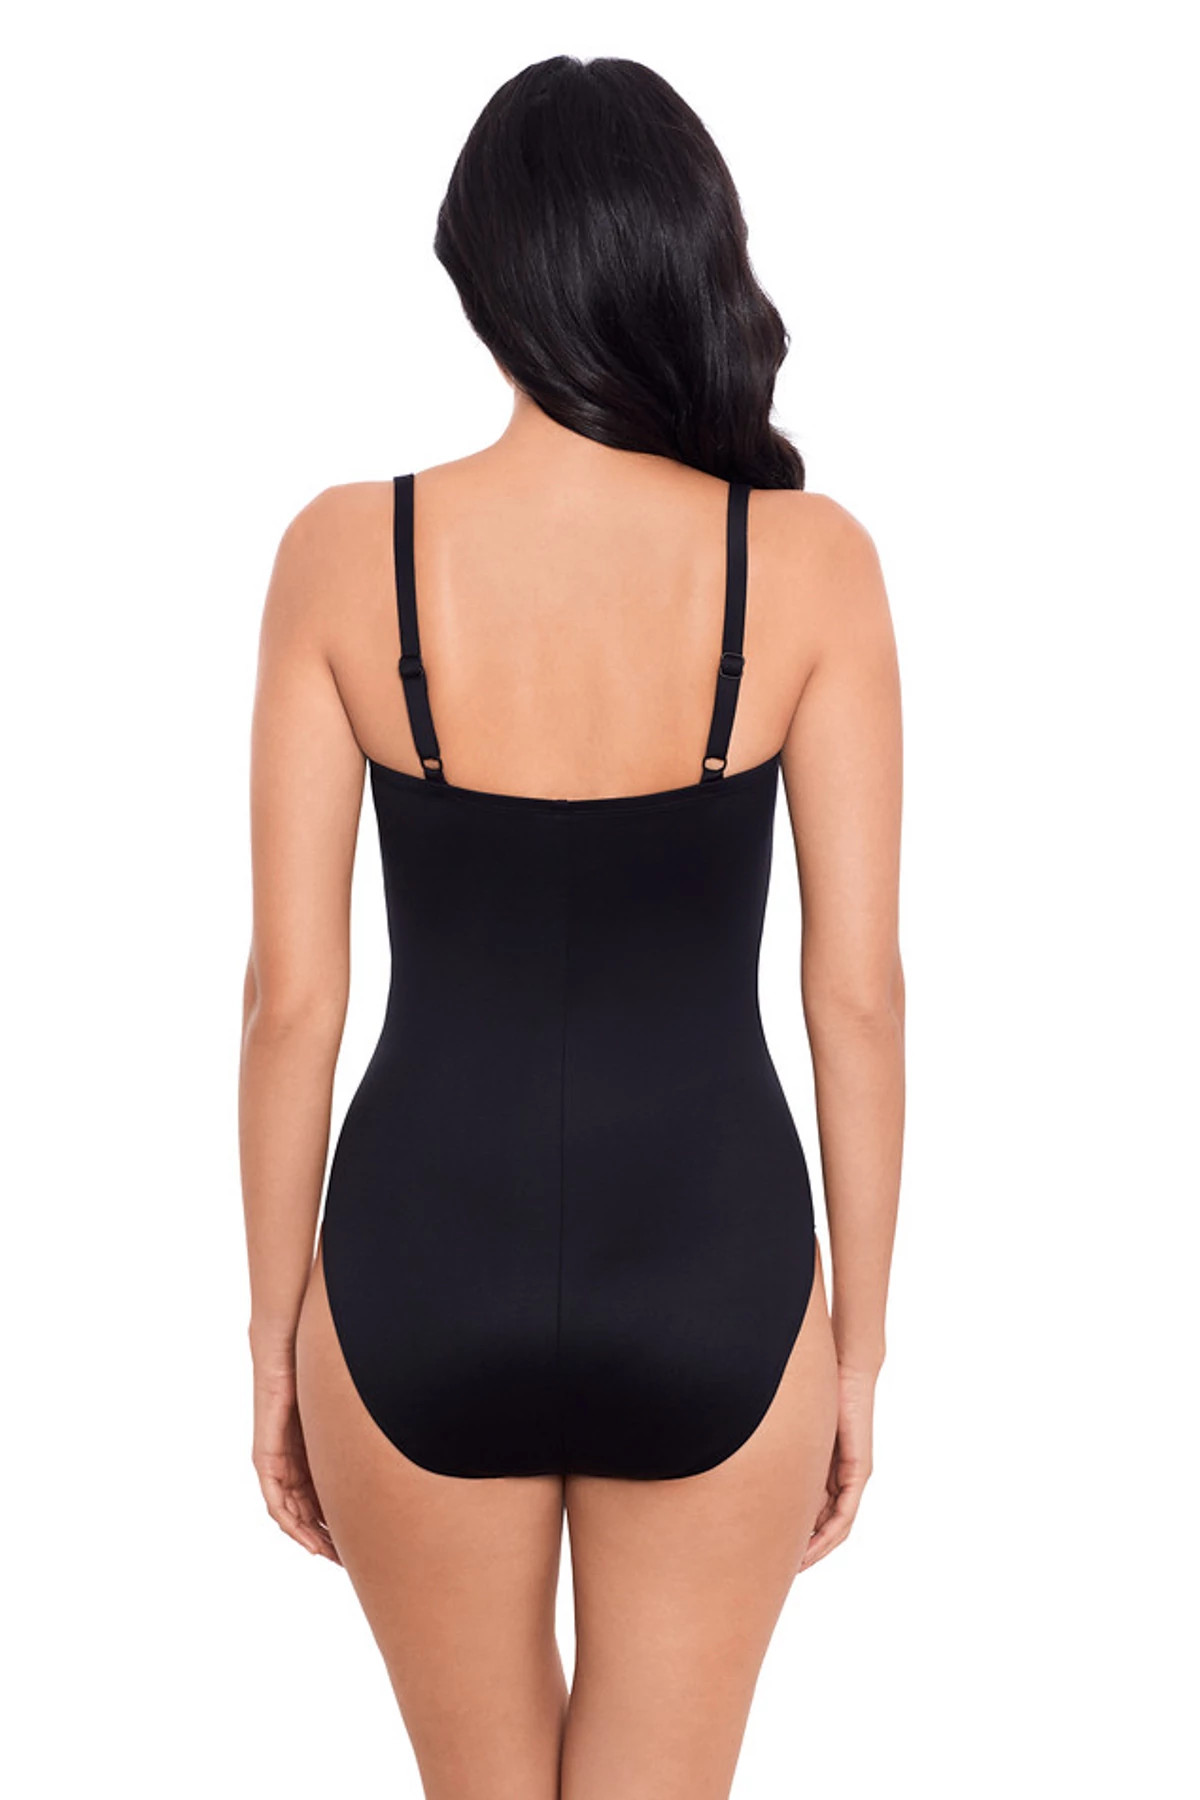 BLACK/WHITE Spectra Lyra One Piece Swimsuit image number 2